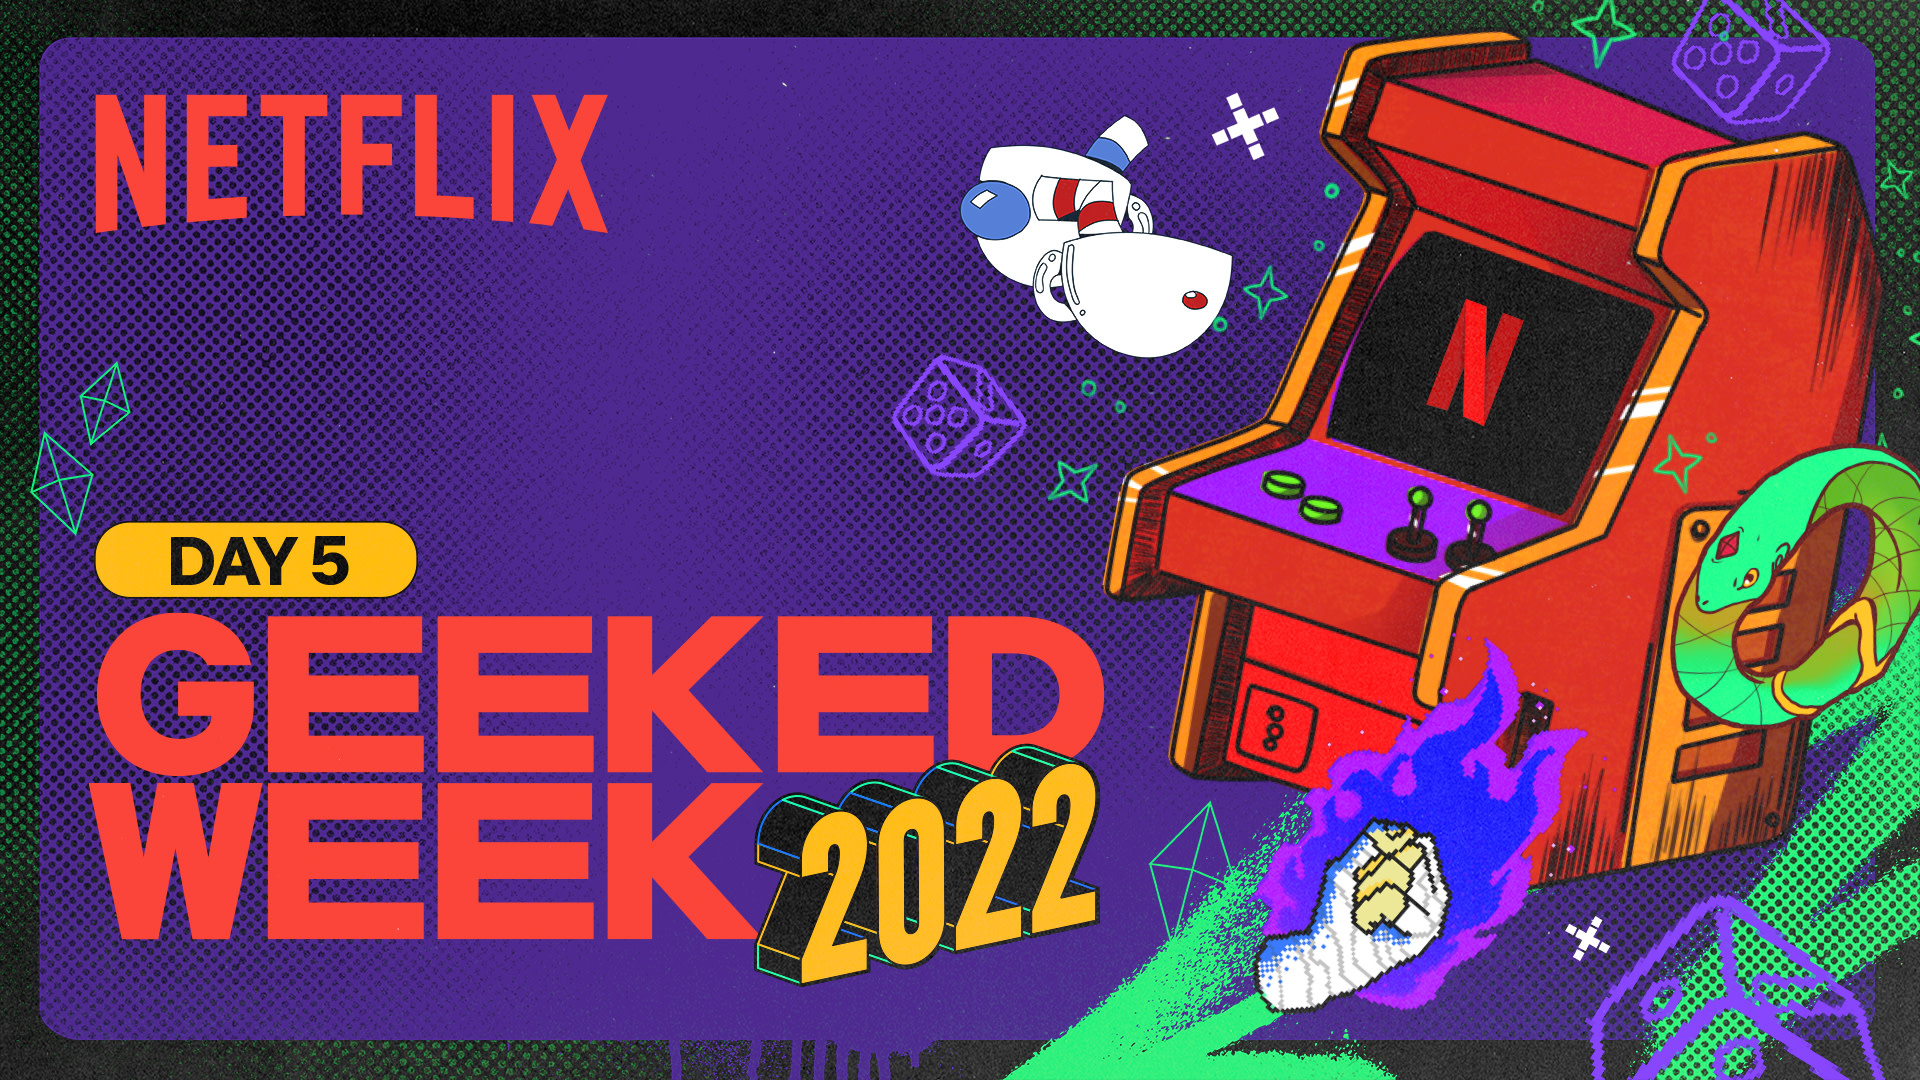 Geeked Week 2022 Recap: All the News and Sneak Peeks From Games Day